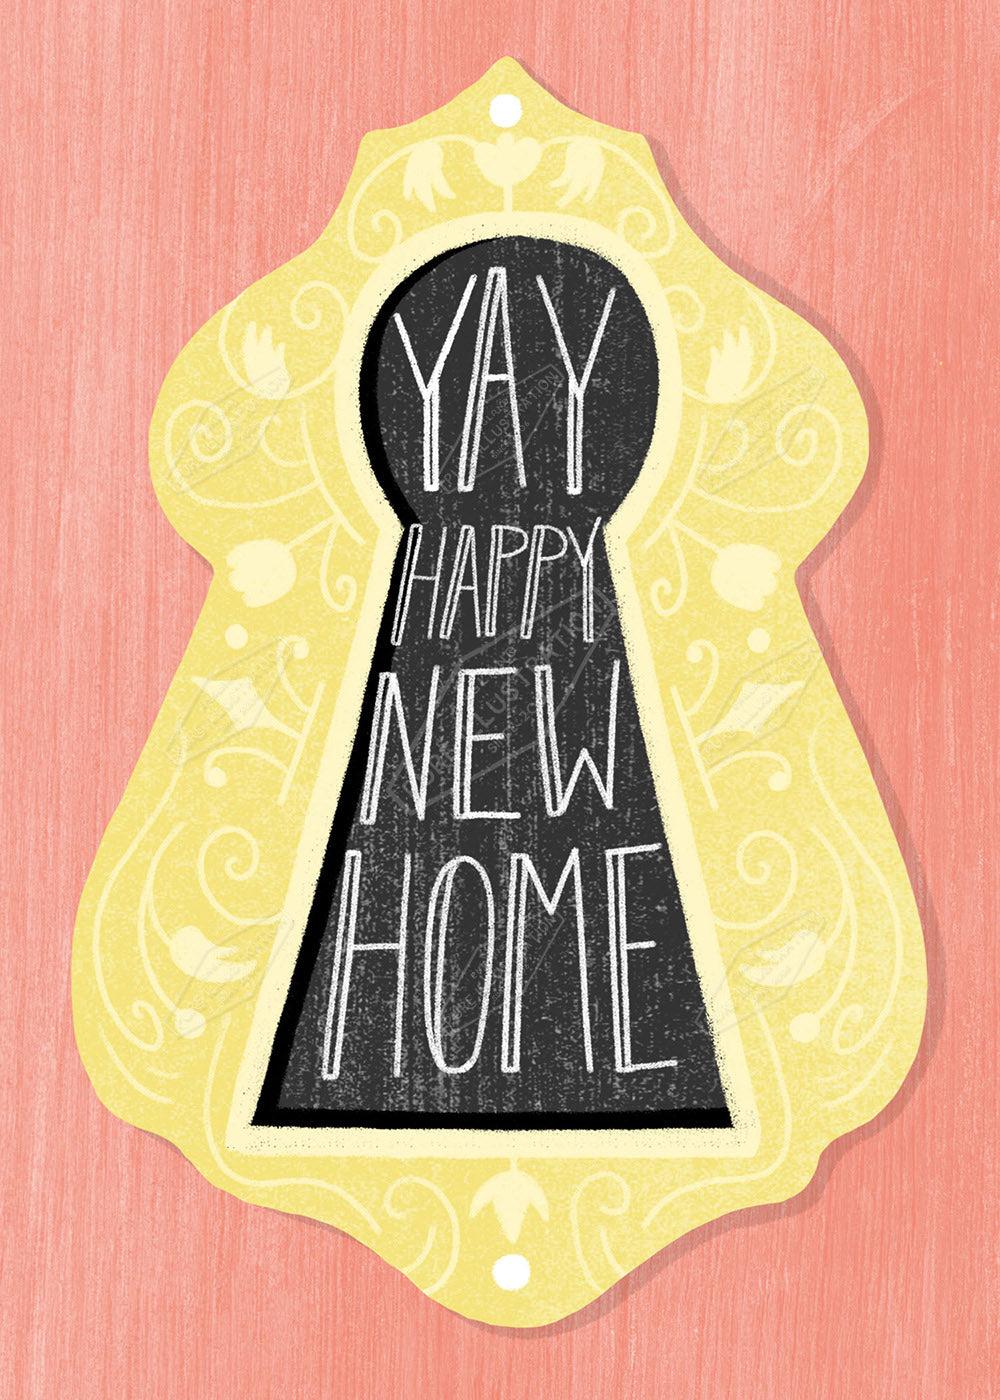 Happy New Home Greeting Card Design - Leah Brideaux is represented by Pure Art Licensing Agency